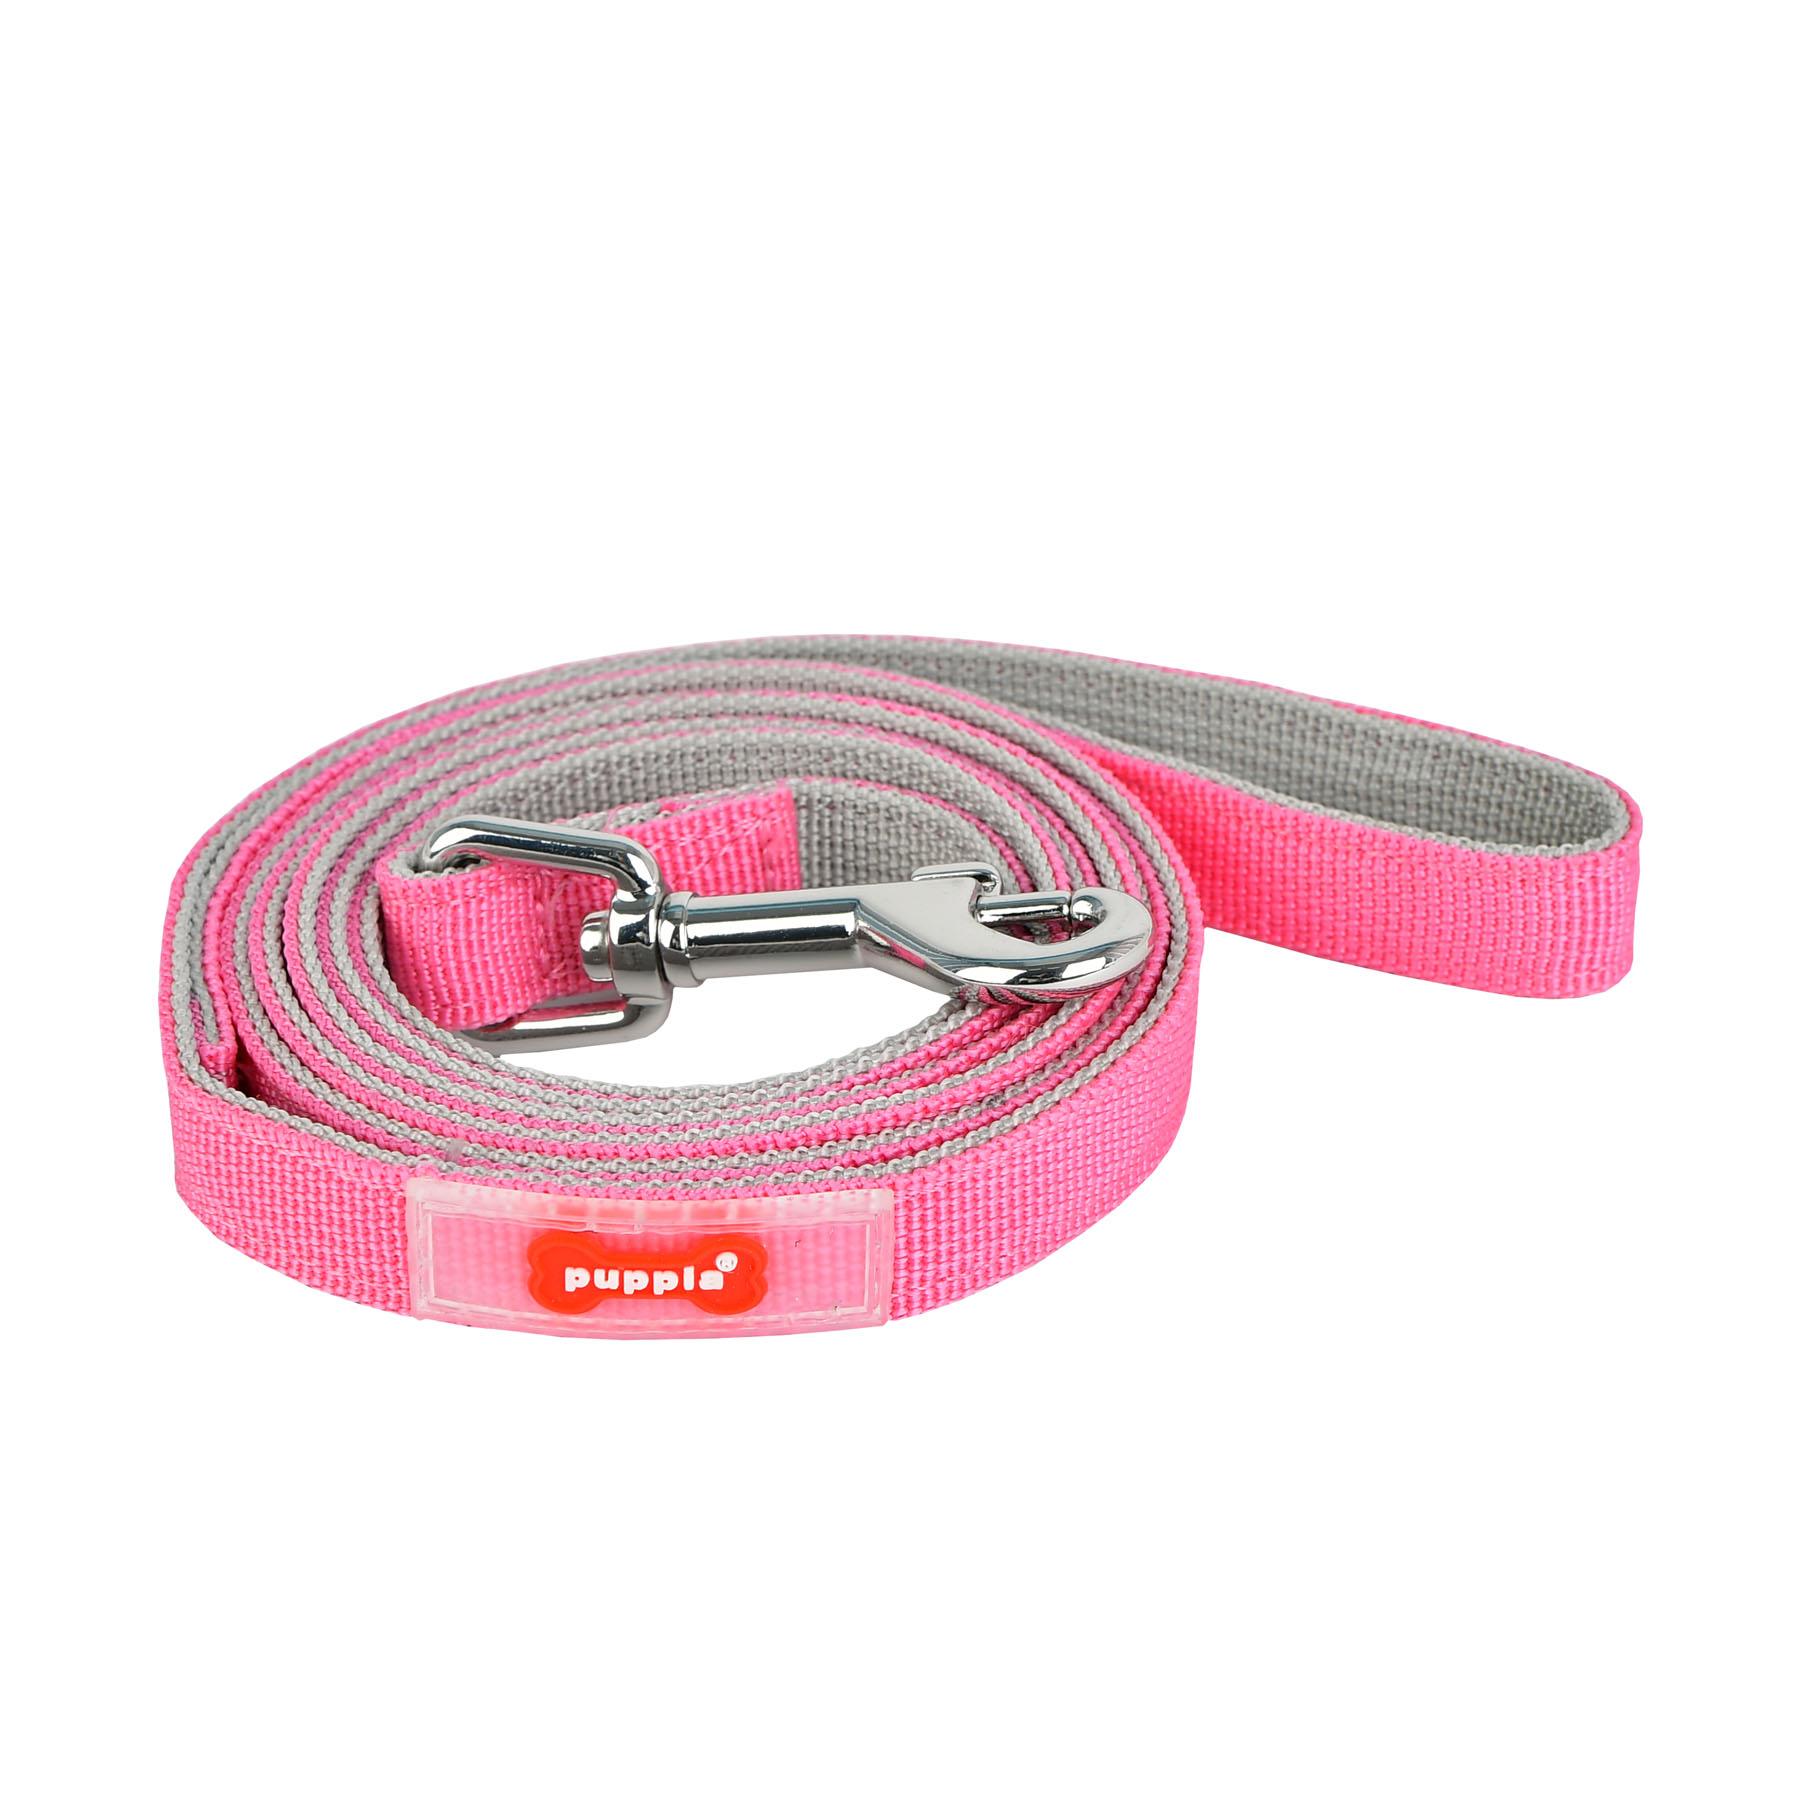 Sport Dog Leash by Puppia - Pink and Gray